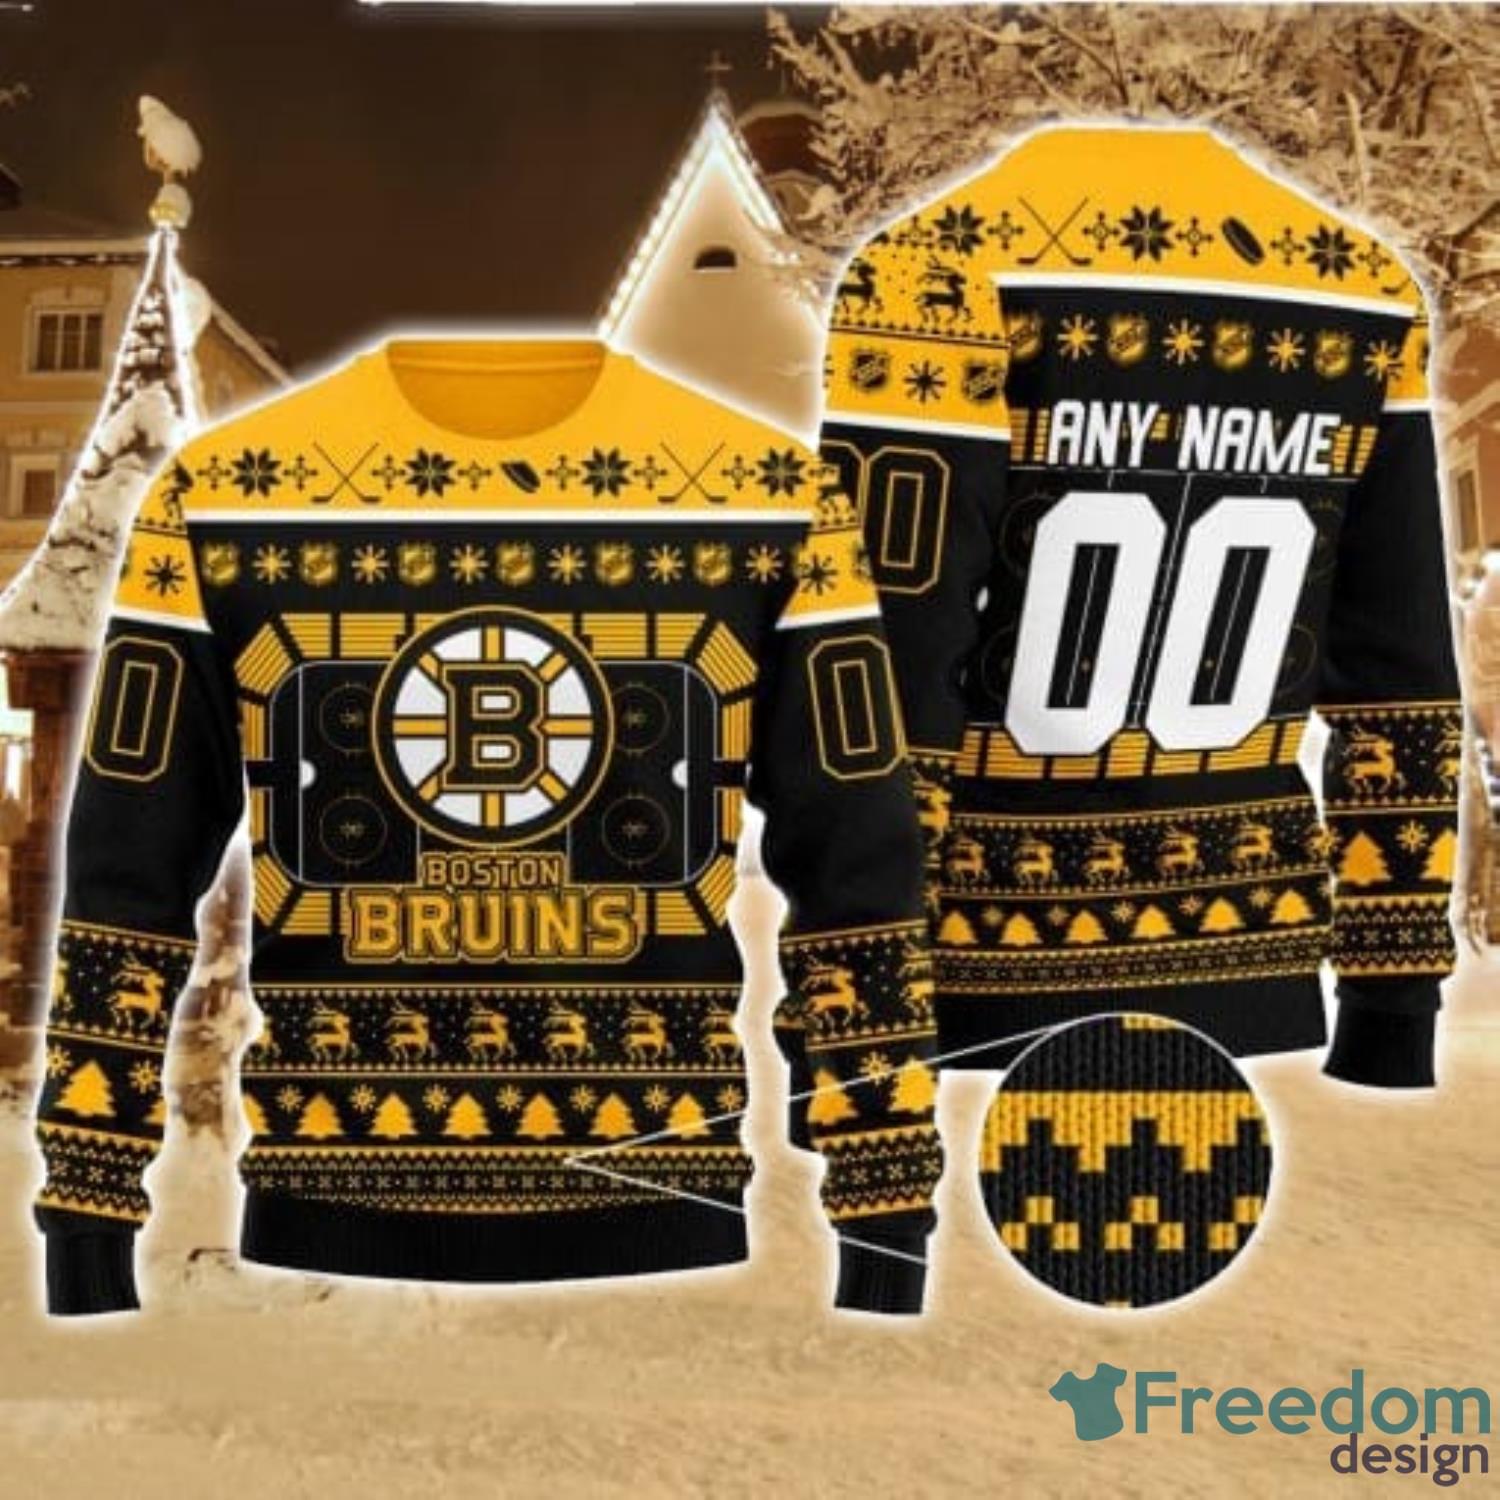 Boston Bruins Pattern Ugly Christmas Sweater Gift - Reallgraphics